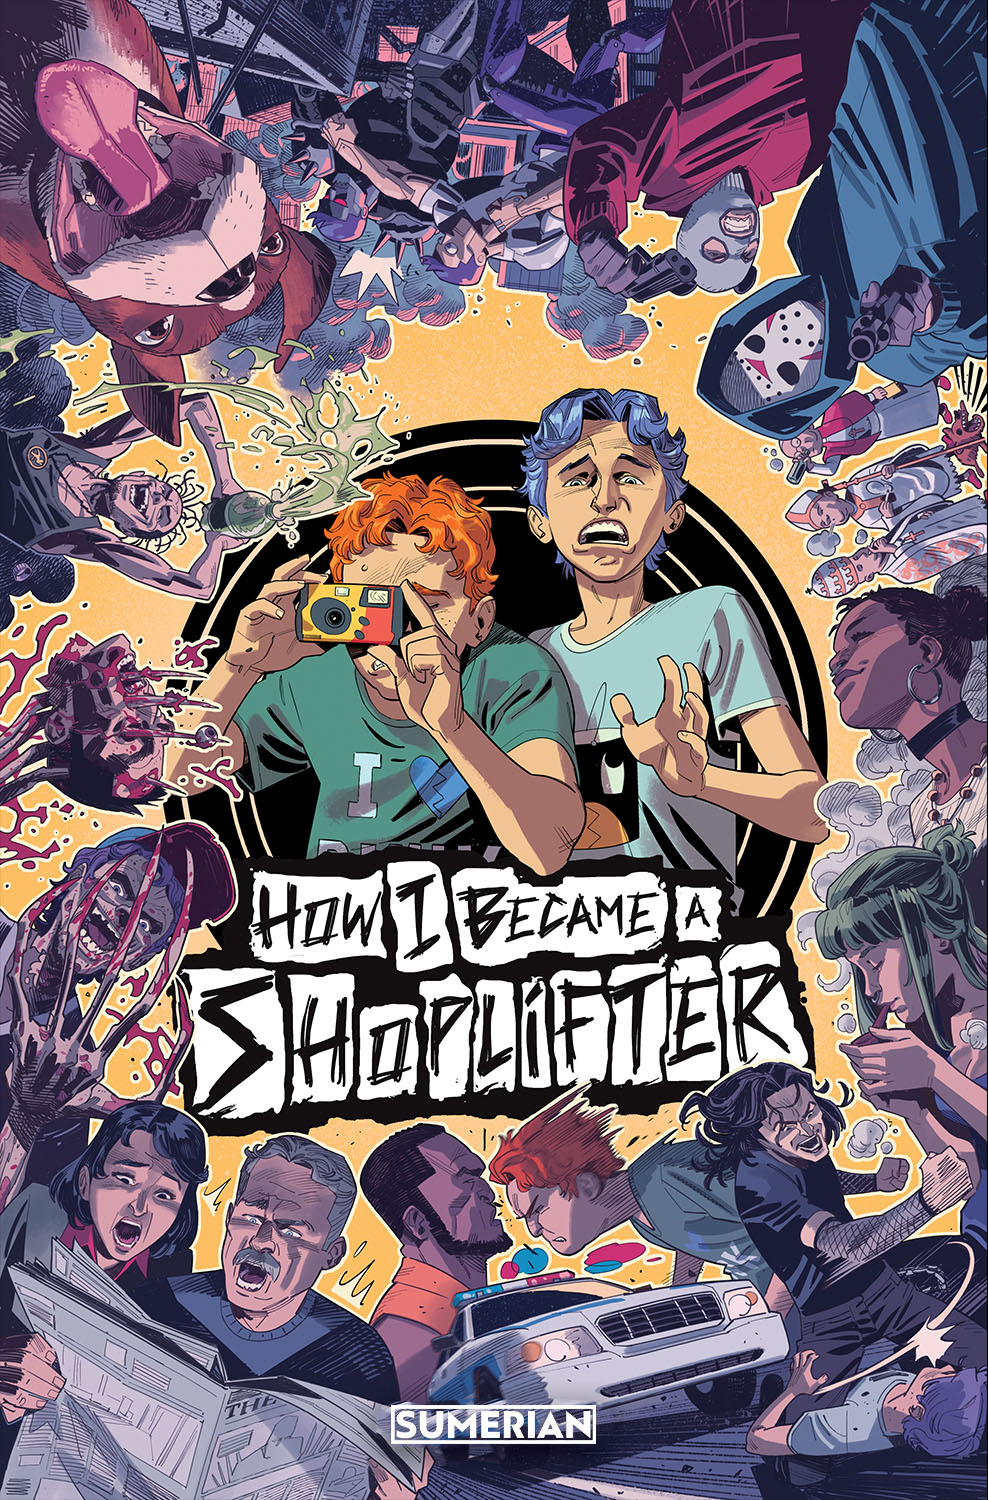 How I Became A Shoplifter #2 Cover A Falzone (Mature) (Of 3)